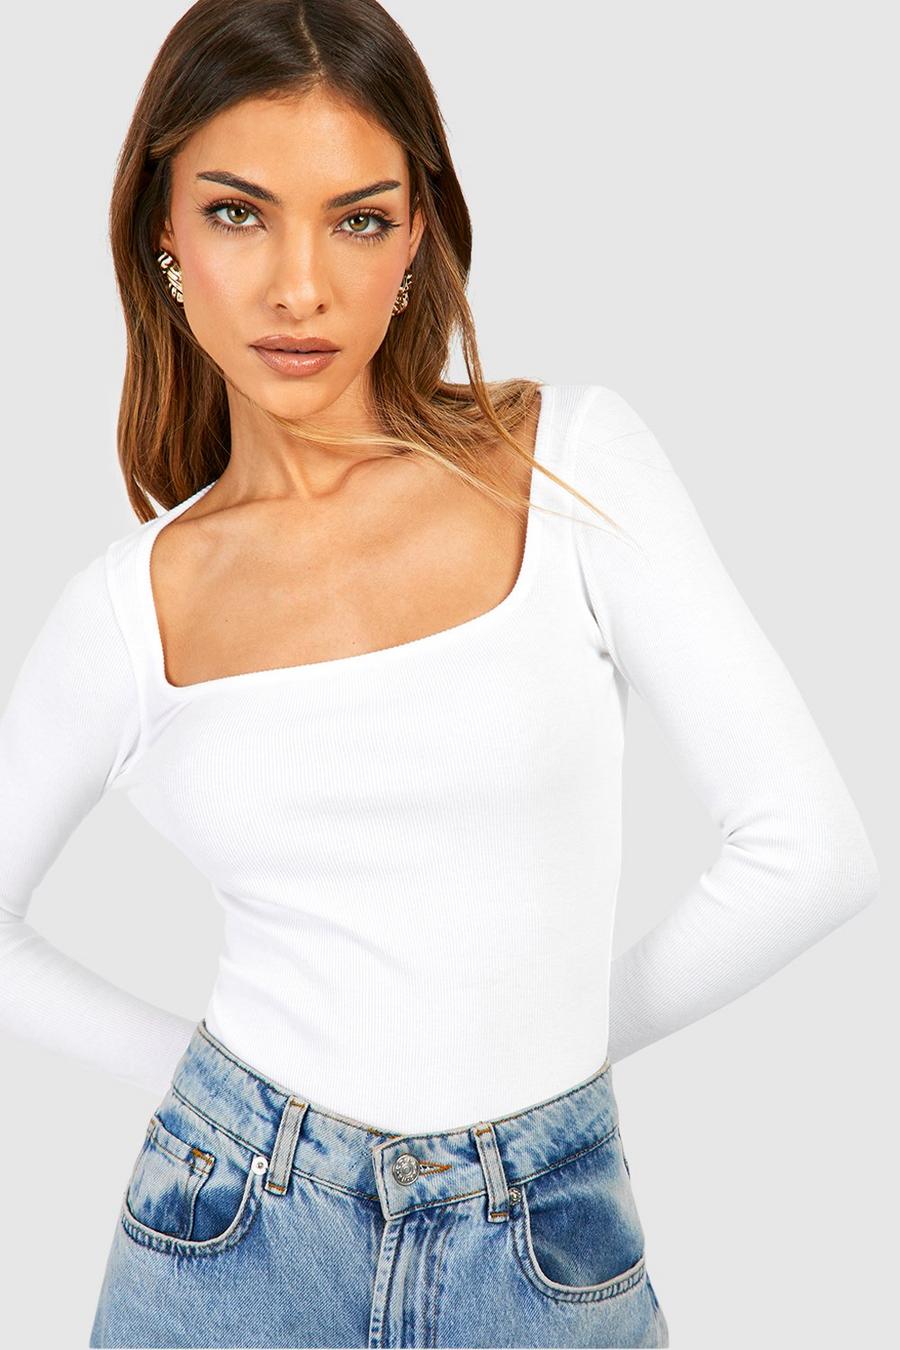 Basic Tops | Essential Tops & Jersey Tops | boohoo USA